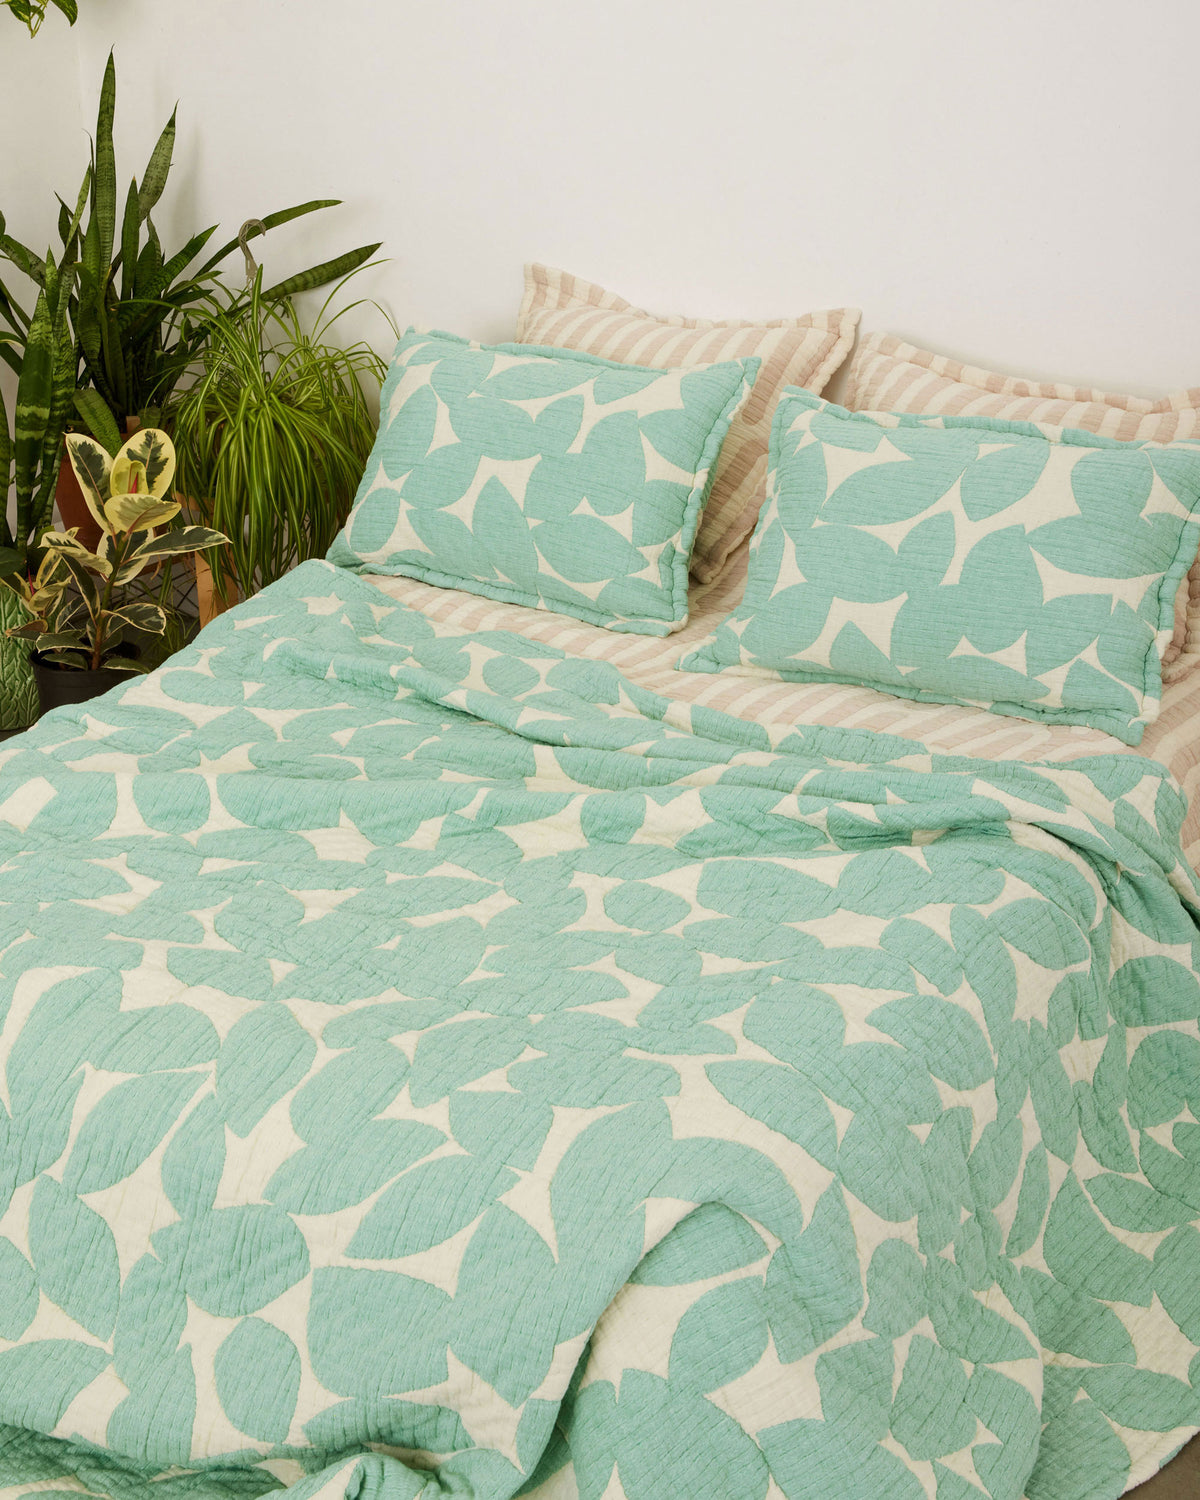 Dusen Dusen Leaf Coverlet. Coverlet Set in green and cream Leaf print. Woven matelassé coverlet with an inner layer of insulation for a quilted effect. Stone-washed, with an extra soft and gauzy hand feel.